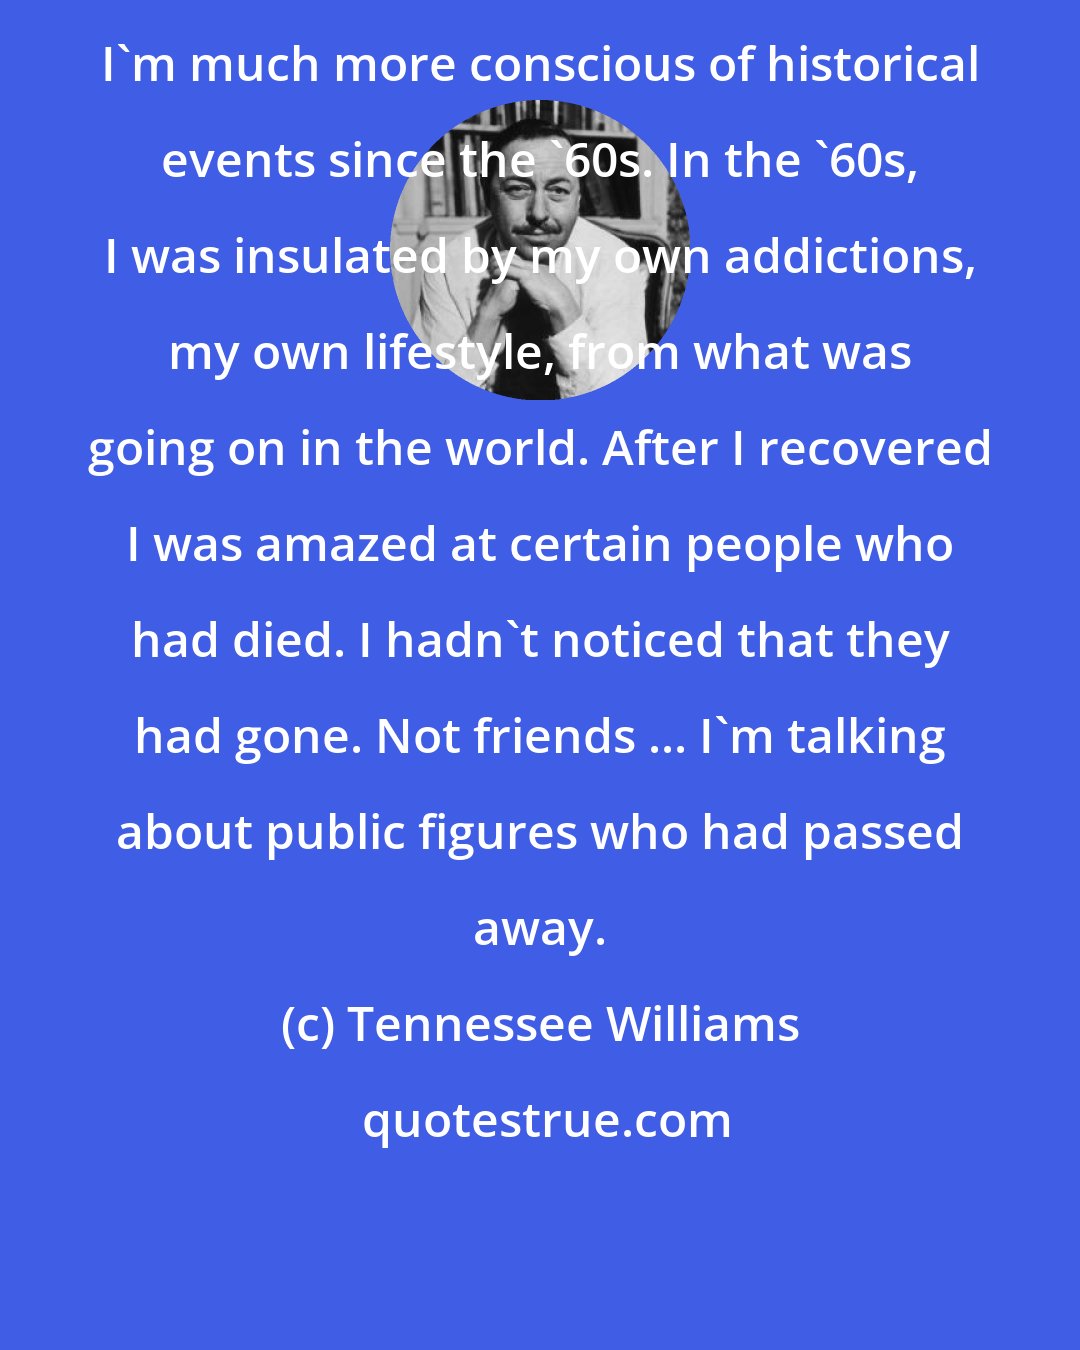 Tennessee Williams: I'm much more conscious of historical events since the '60s. In the '60s, I was insulated by my own addictions, my own lifestyle, from what was going on in the world. After I recovered I was amazed at certain people who had died. I hadn't noticed that they had gone. Not friends ... I'm talking about public figures who had passed away.